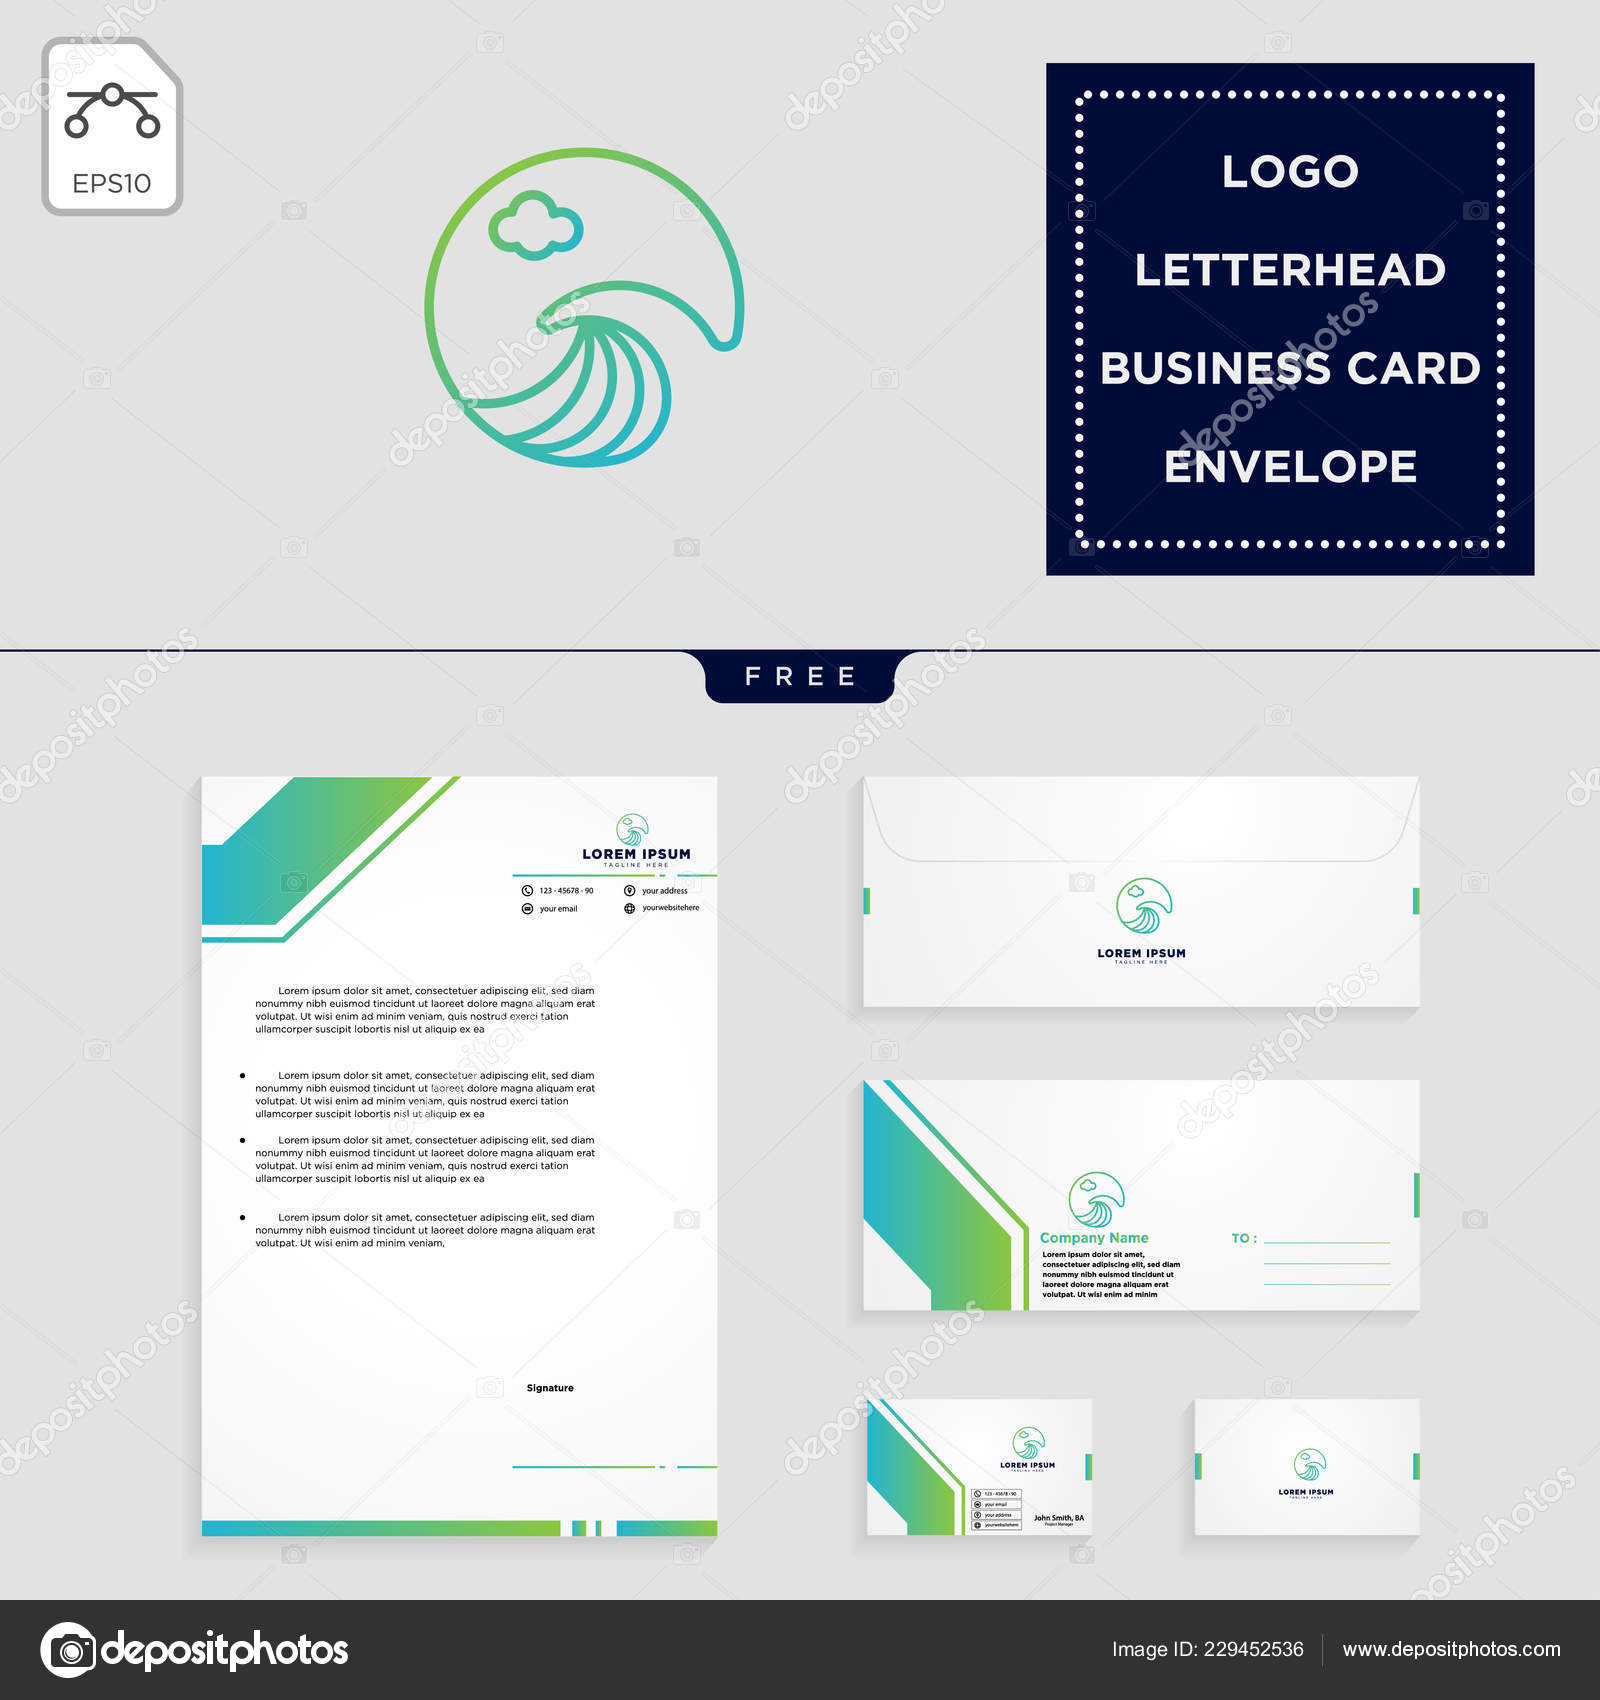 Beach Landscape Holidays Logo Template Vector Illustration Free With Business Card Letterhead Envelope Template